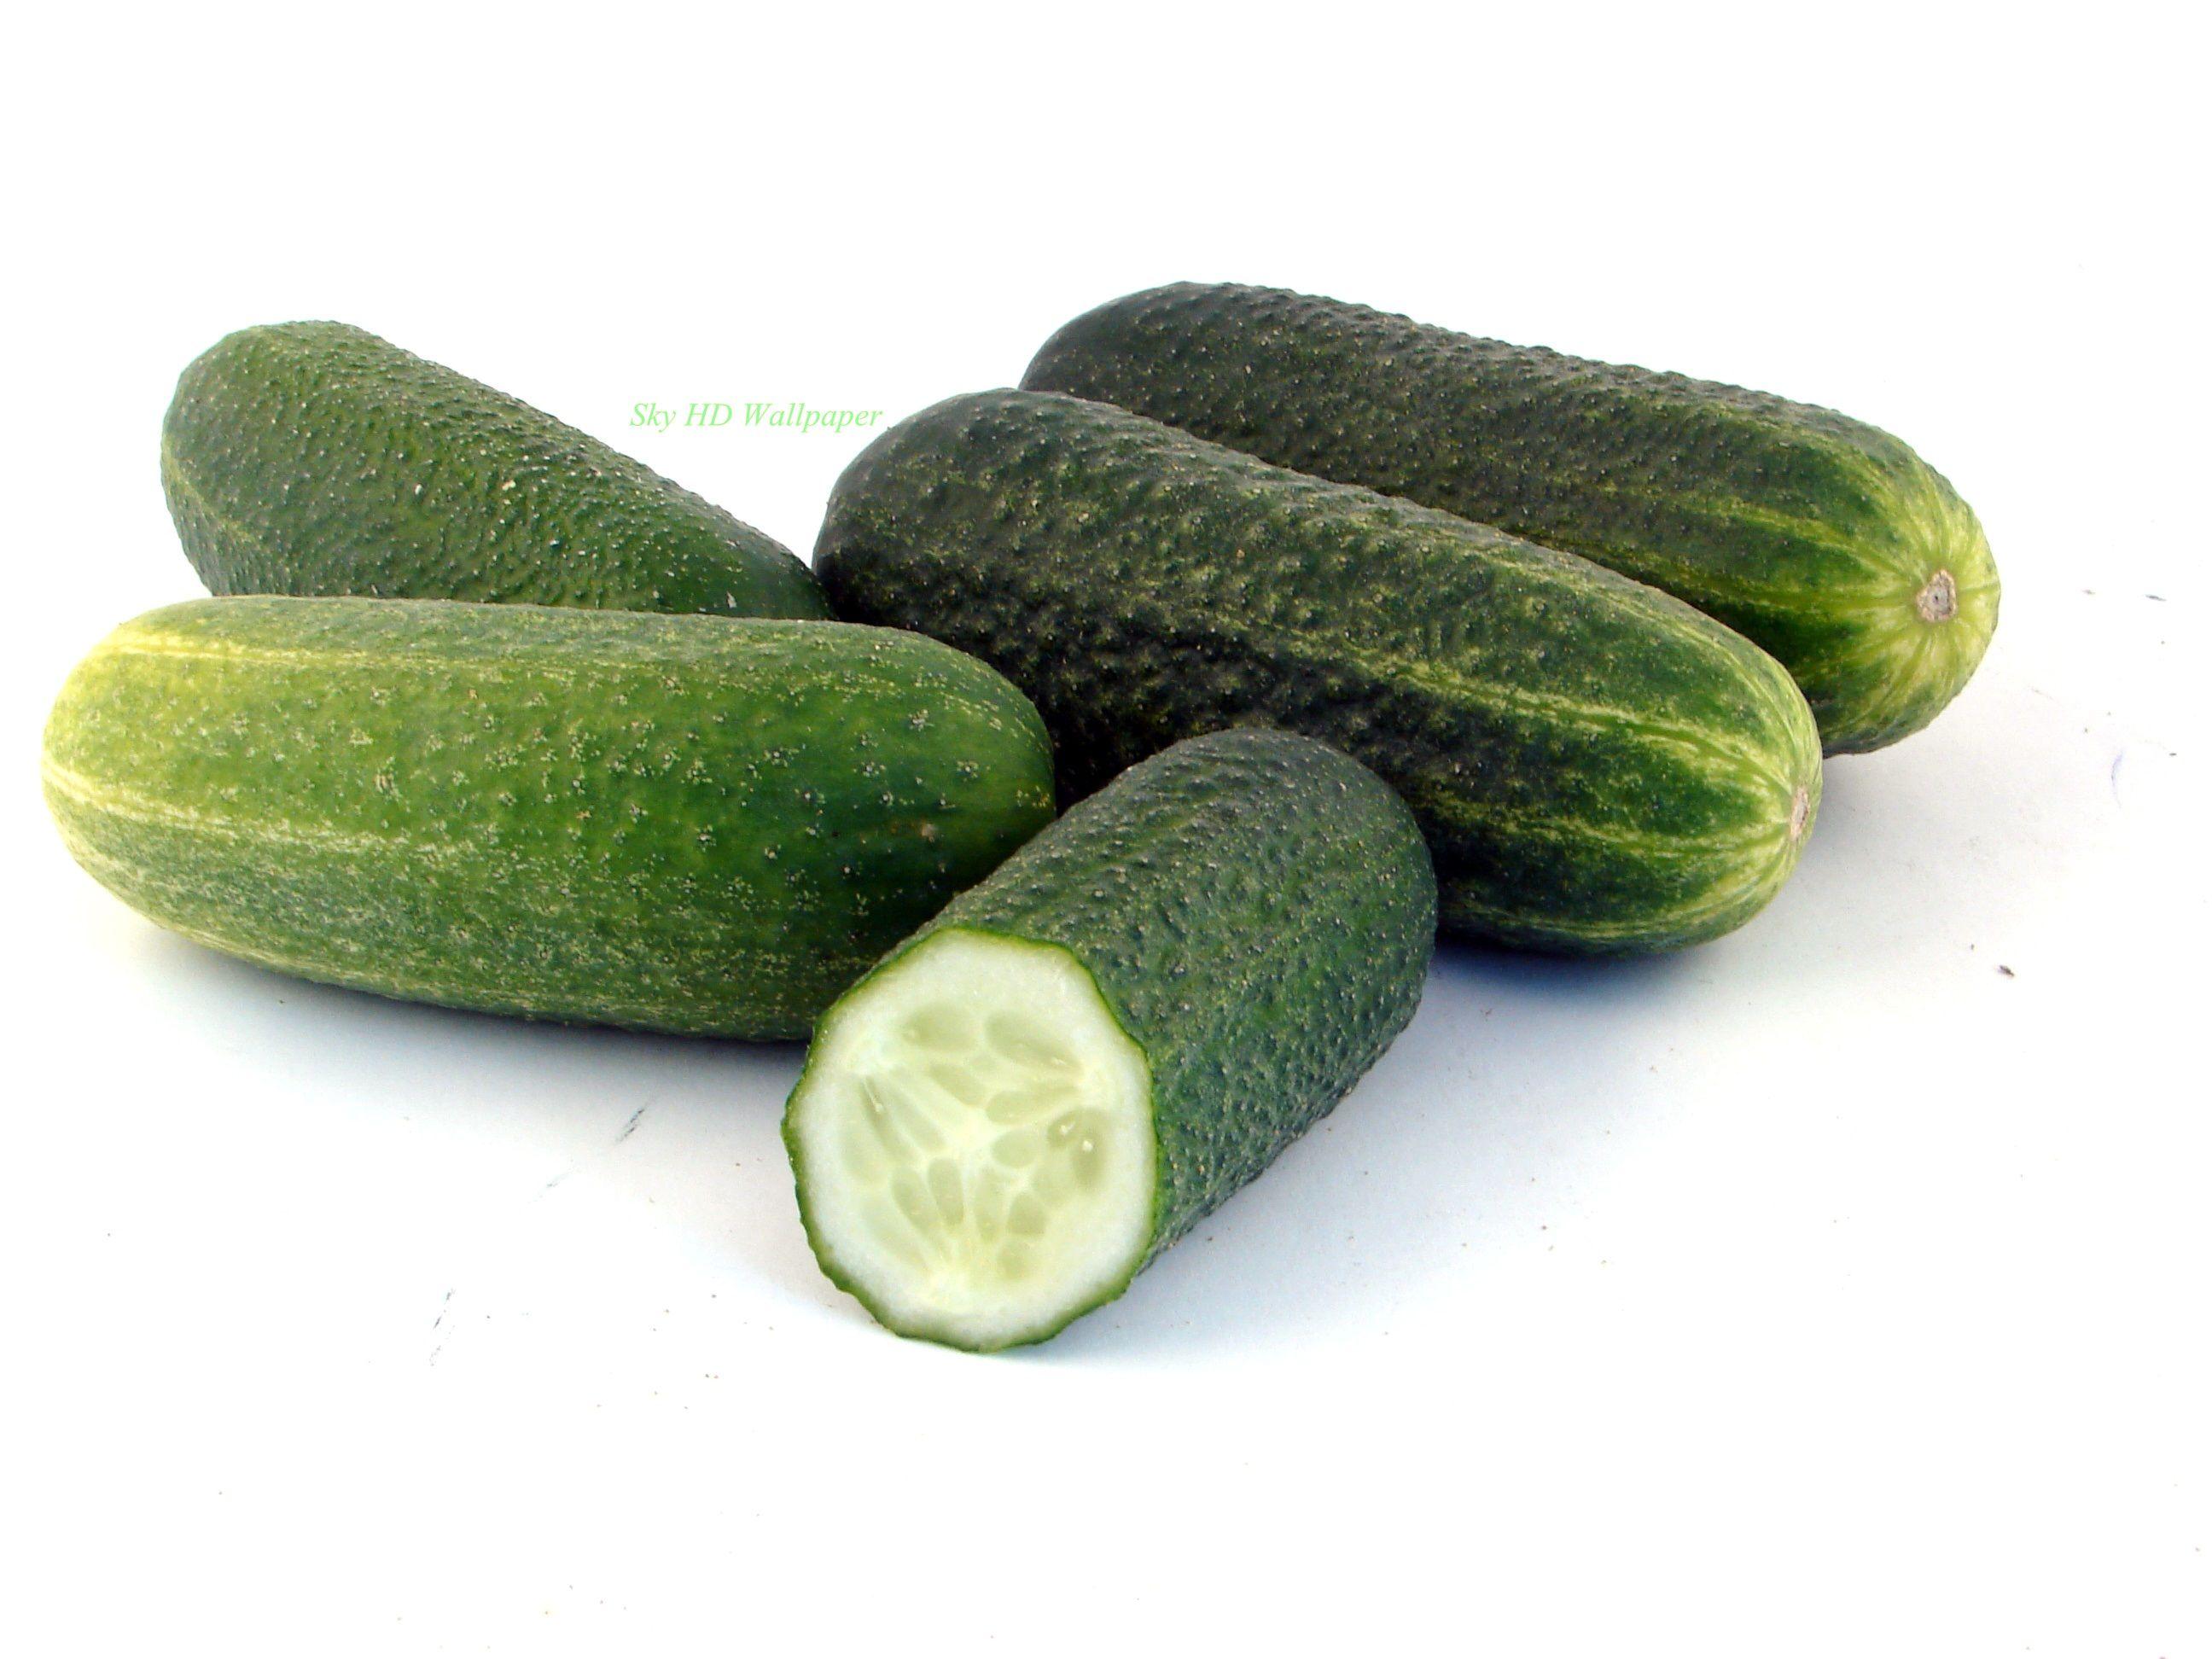 Cucumber Background Images HD Pictures and Wallpaper For Free Download   Pngtree